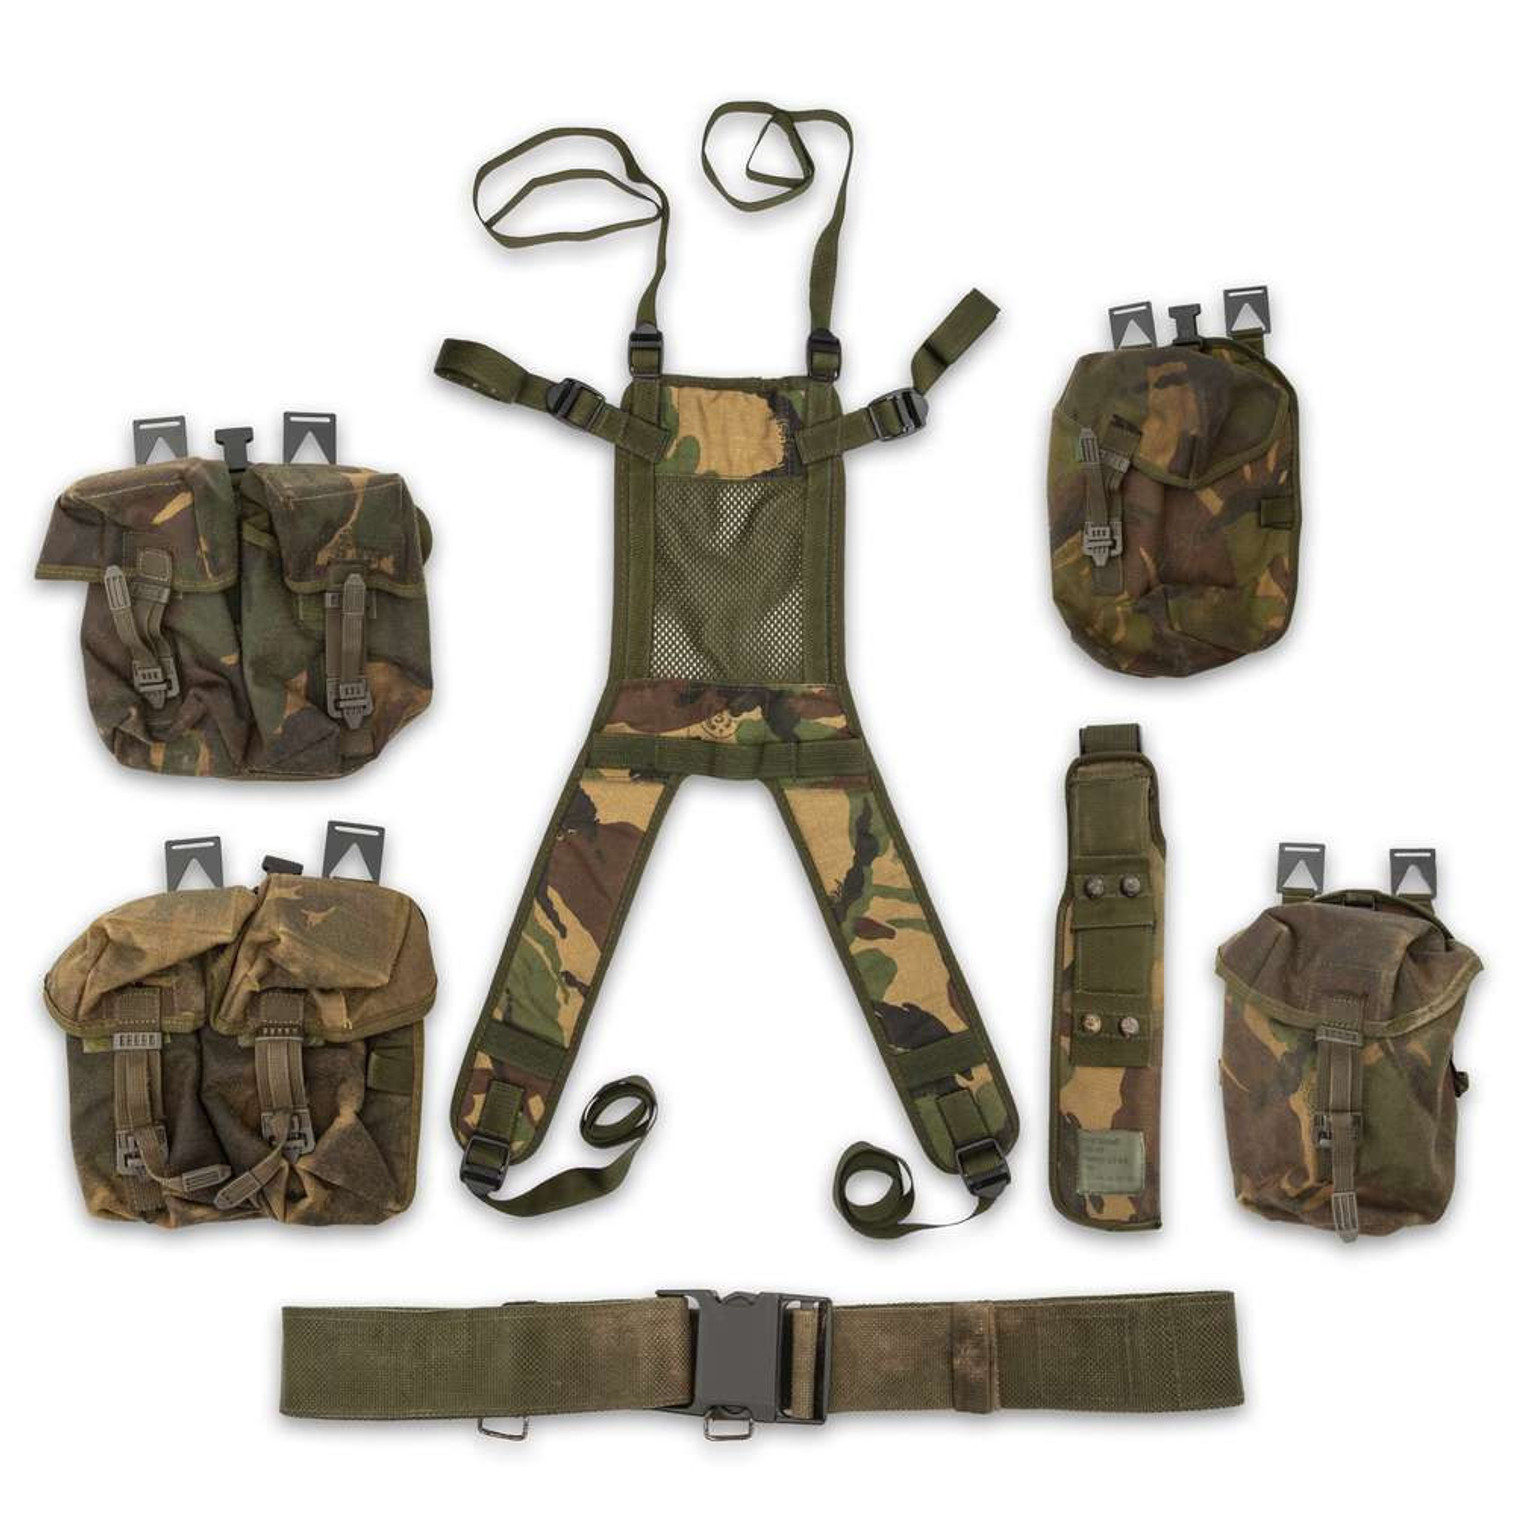 British Armed Forces Harness And Gear Bag Set DPM